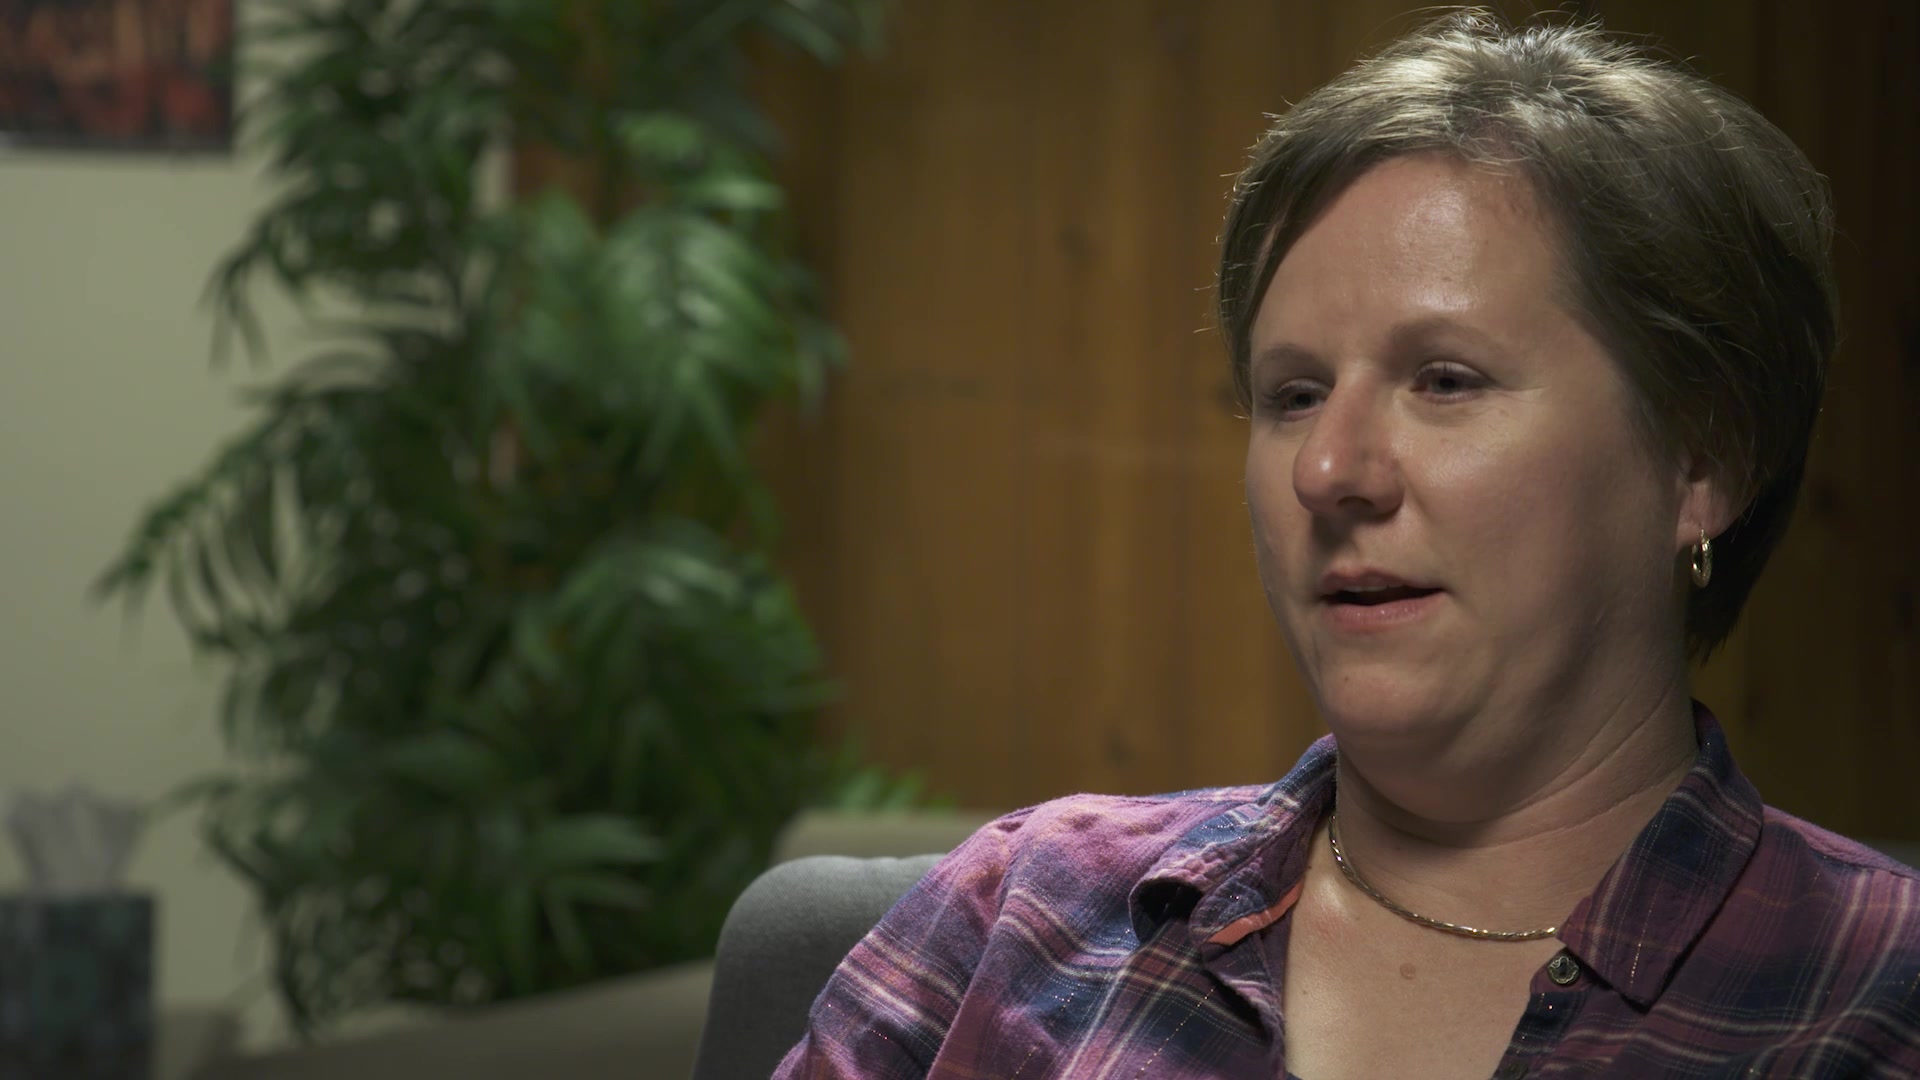 Check out this episode of our #resilience video series. Hear the story of Shellie Daniels, Maj. Josh Daniels wife, who was diagnosed with breast cancer. . #YoureNotAlone